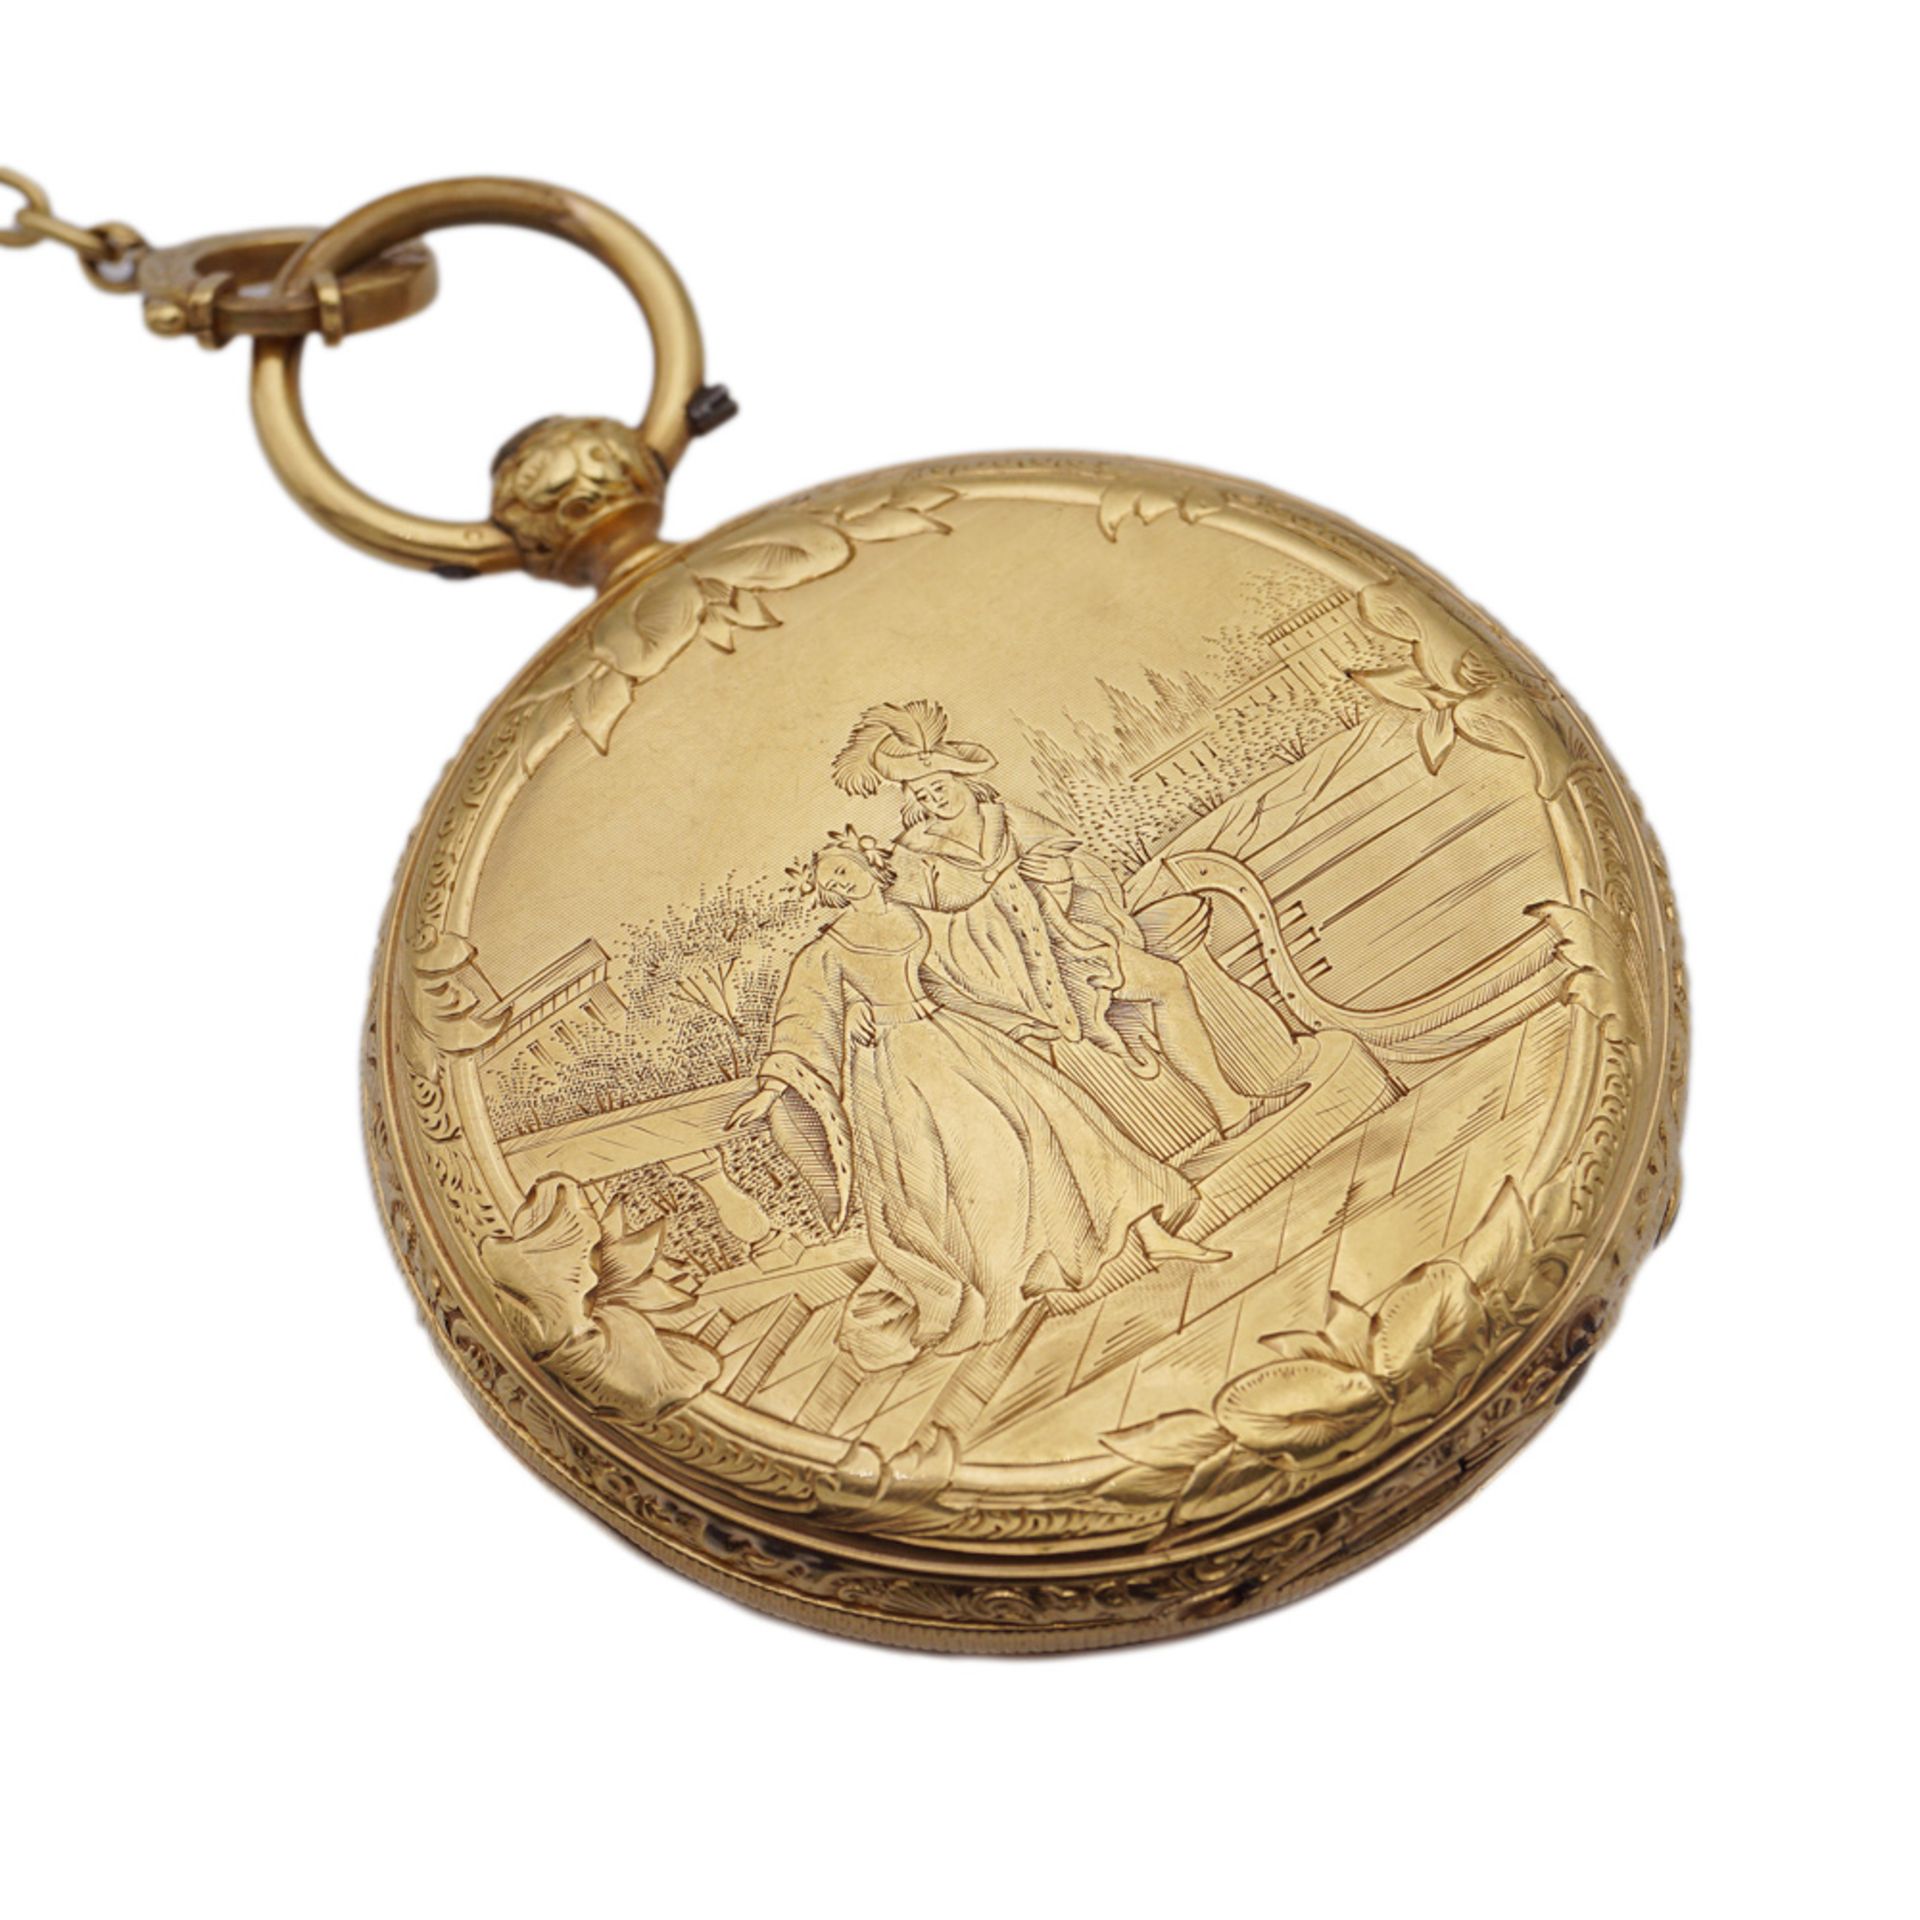 Aiguille, savonette pocket watch with chain and key - Image 2 of 4